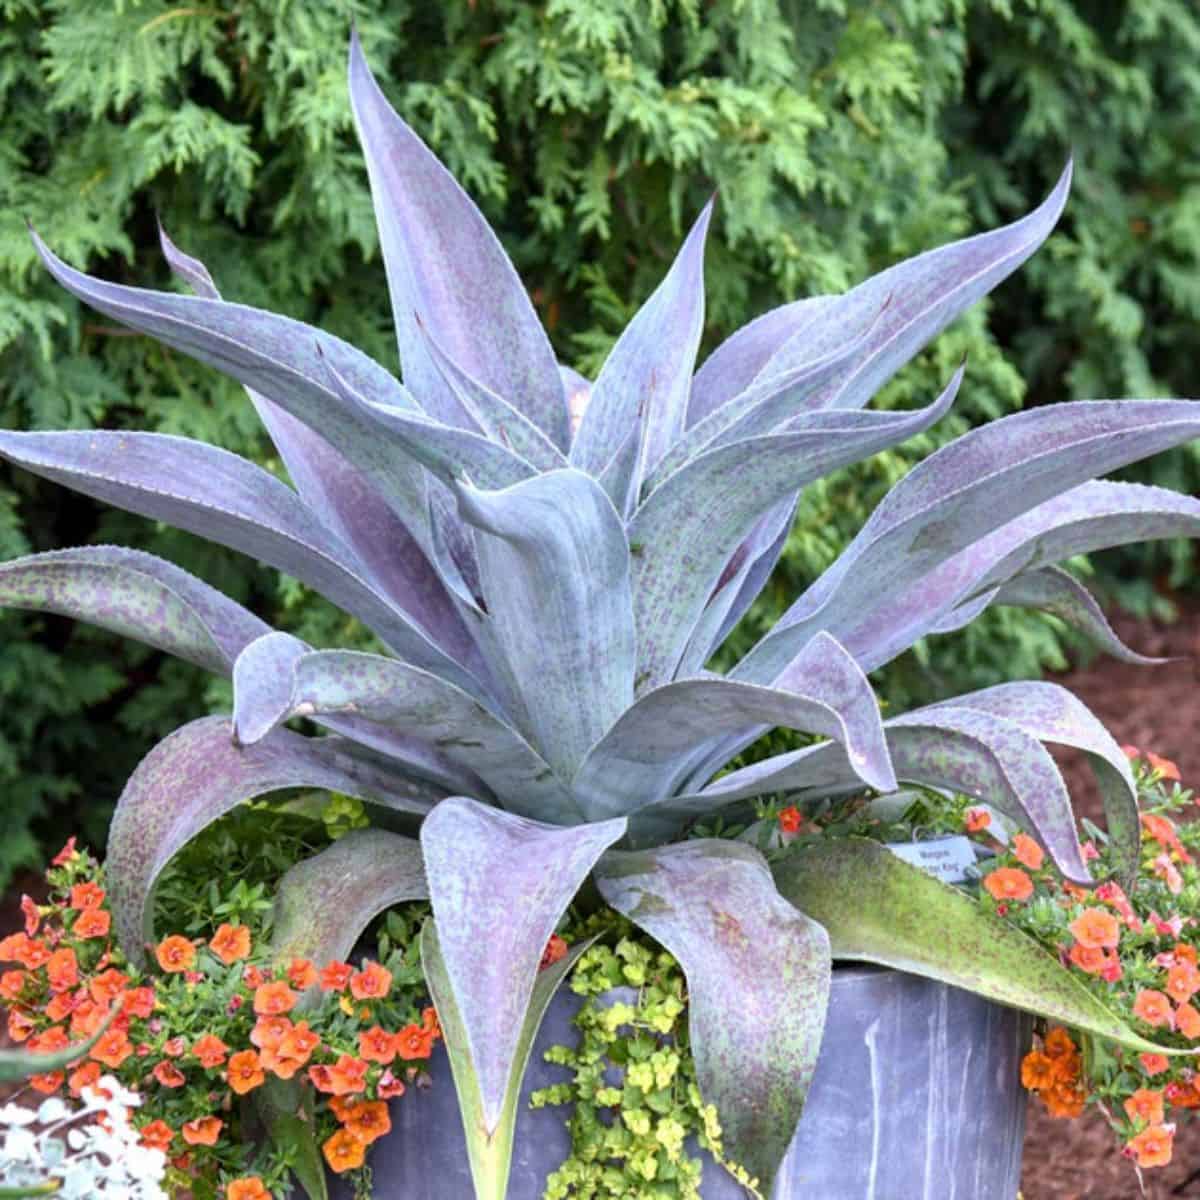 Mangave Aztec King variety grows in a garden,